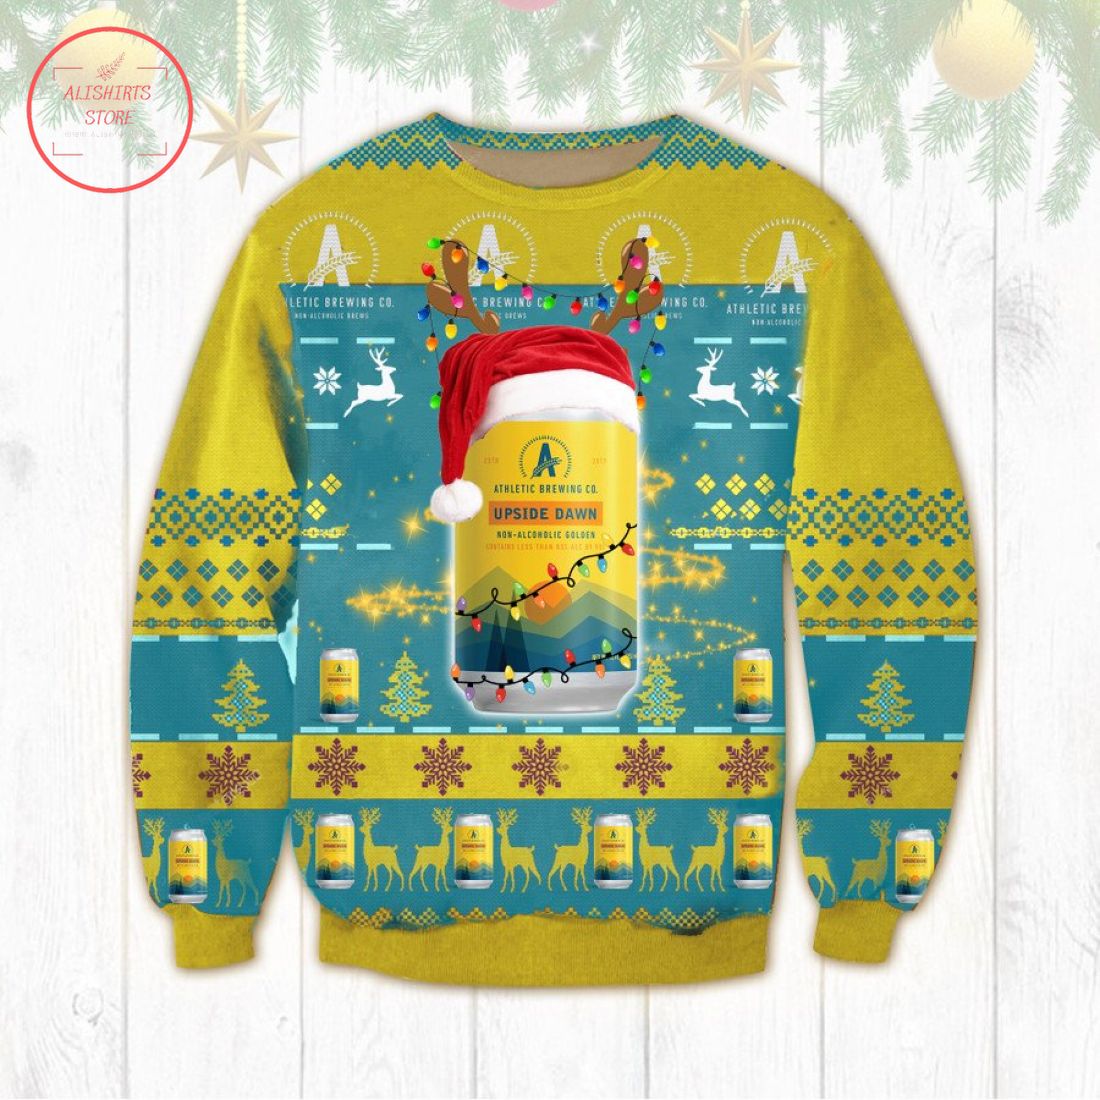 Athletic Brewing Upside Dawn Ugly Christmas Sweater